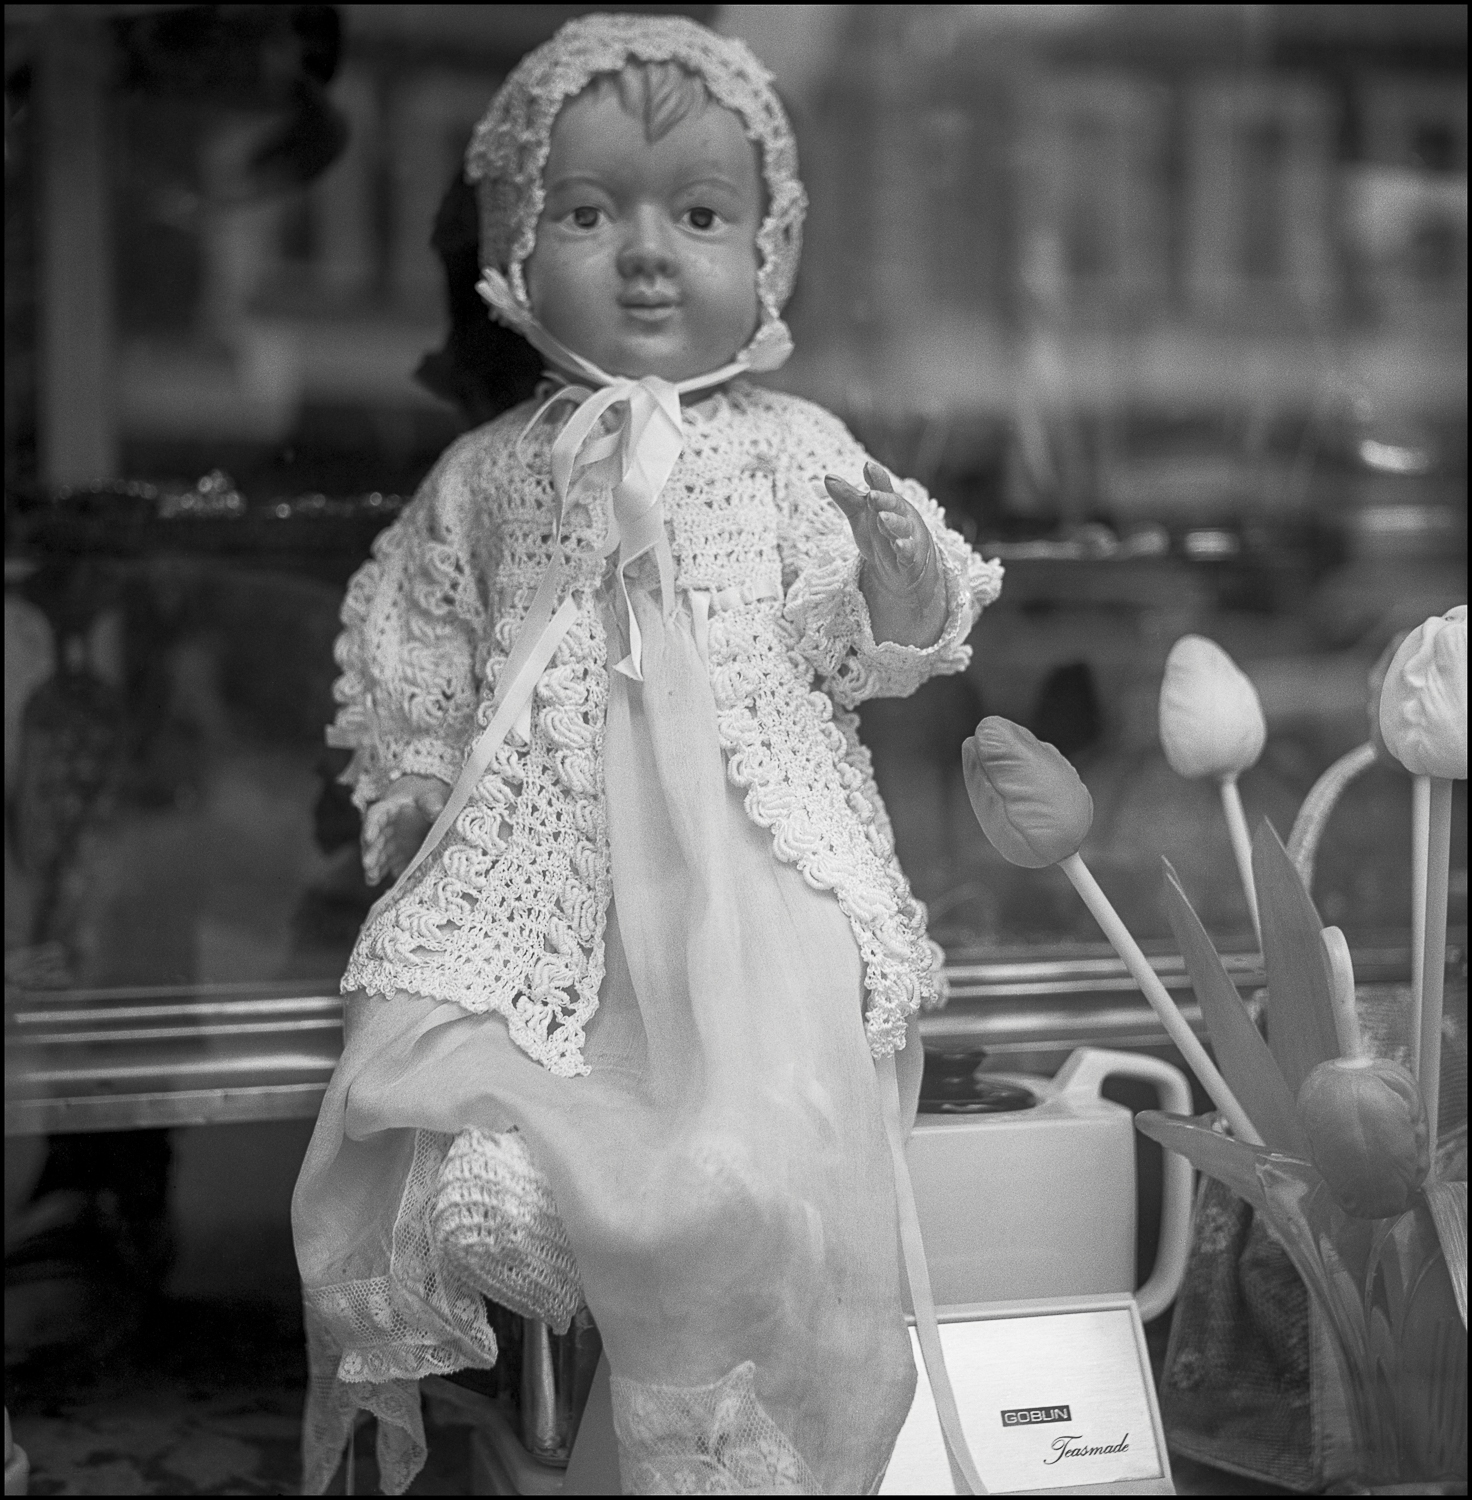 doll, Rundle Mall